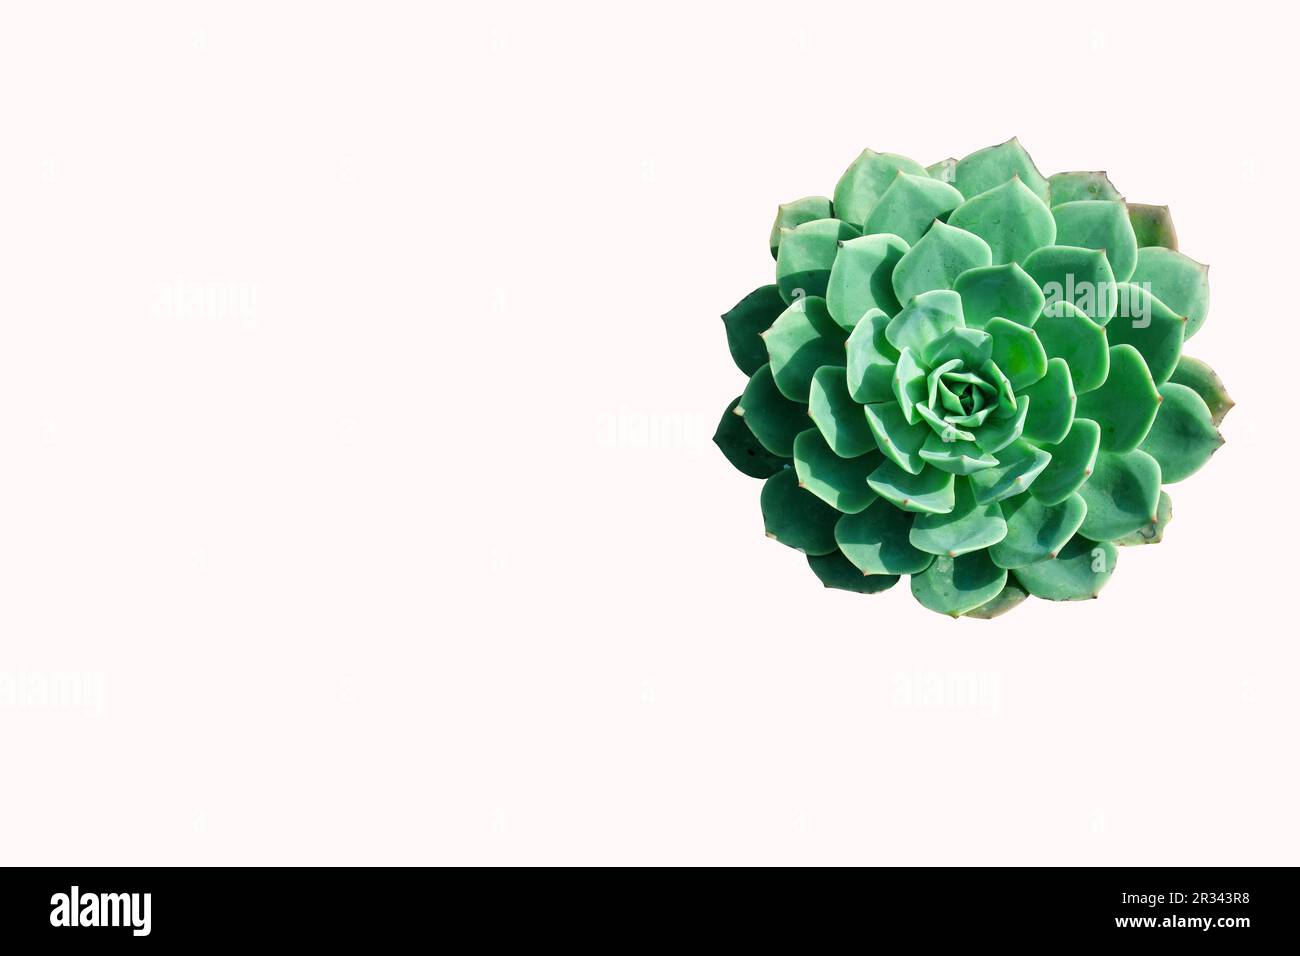 Echeveria elegans is a popular succulent that forms compact rosettes of spoon-shaped pale bluish-green leaves. Stock Photo